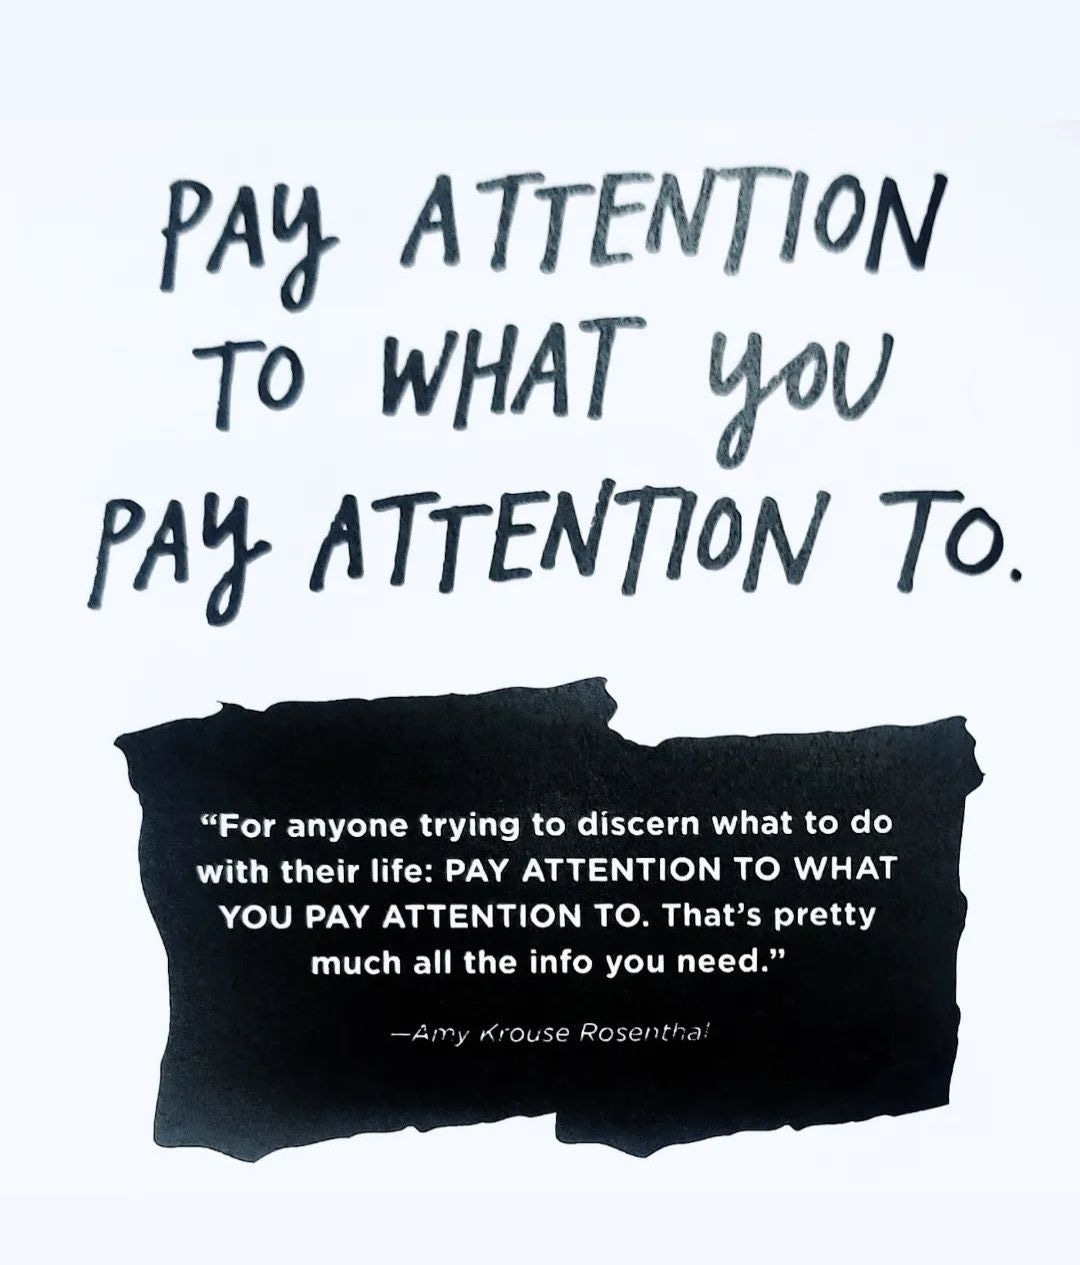 Pay Attention To What You Pay Attention To - Keep Going